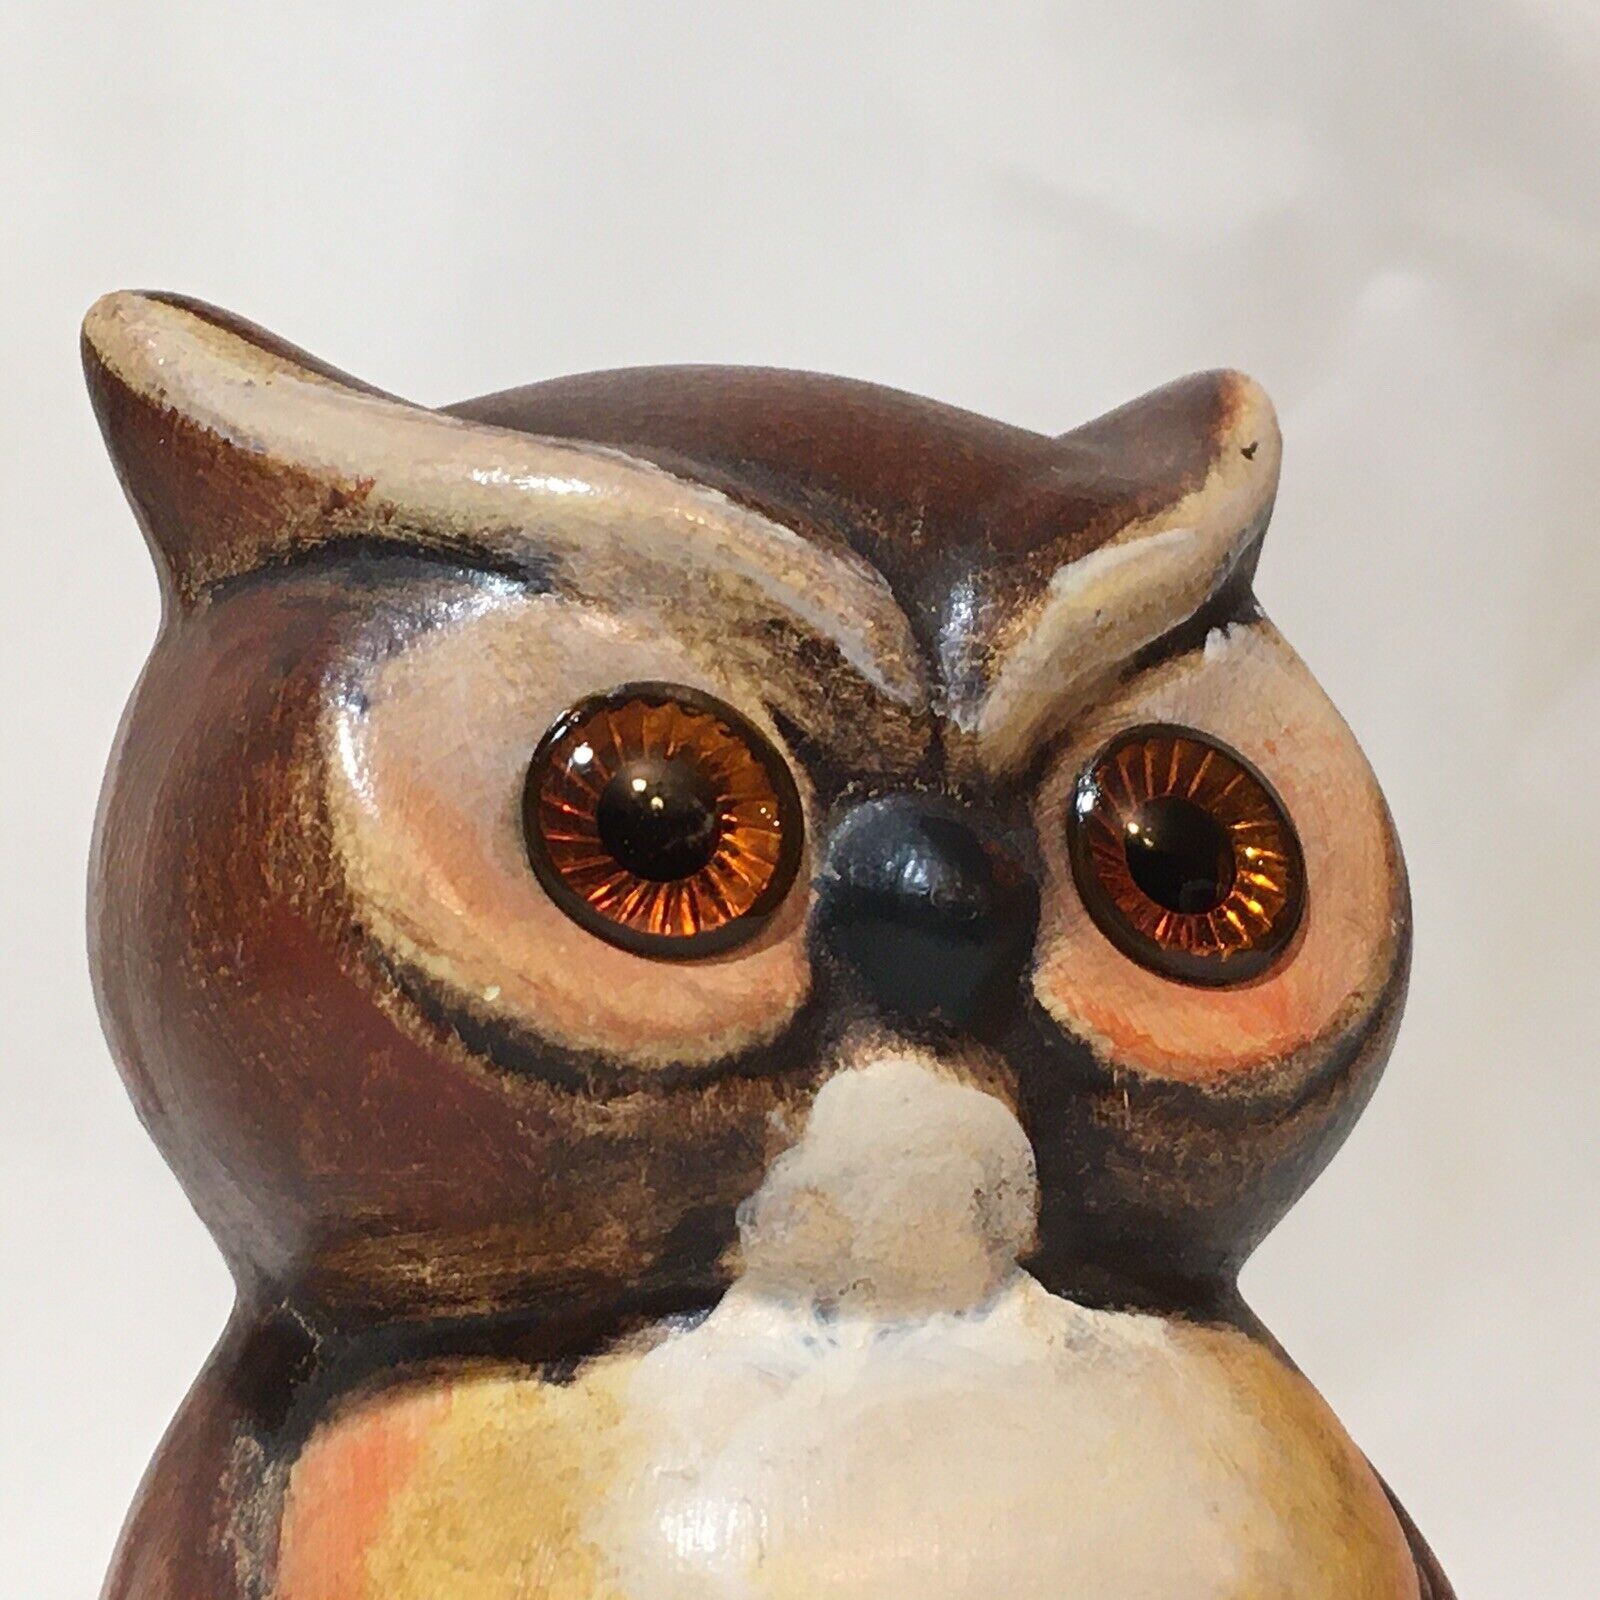 3.9” Vintage Ceramic Owl Figurine, Hand Painted, Whimsical Collectible❤️